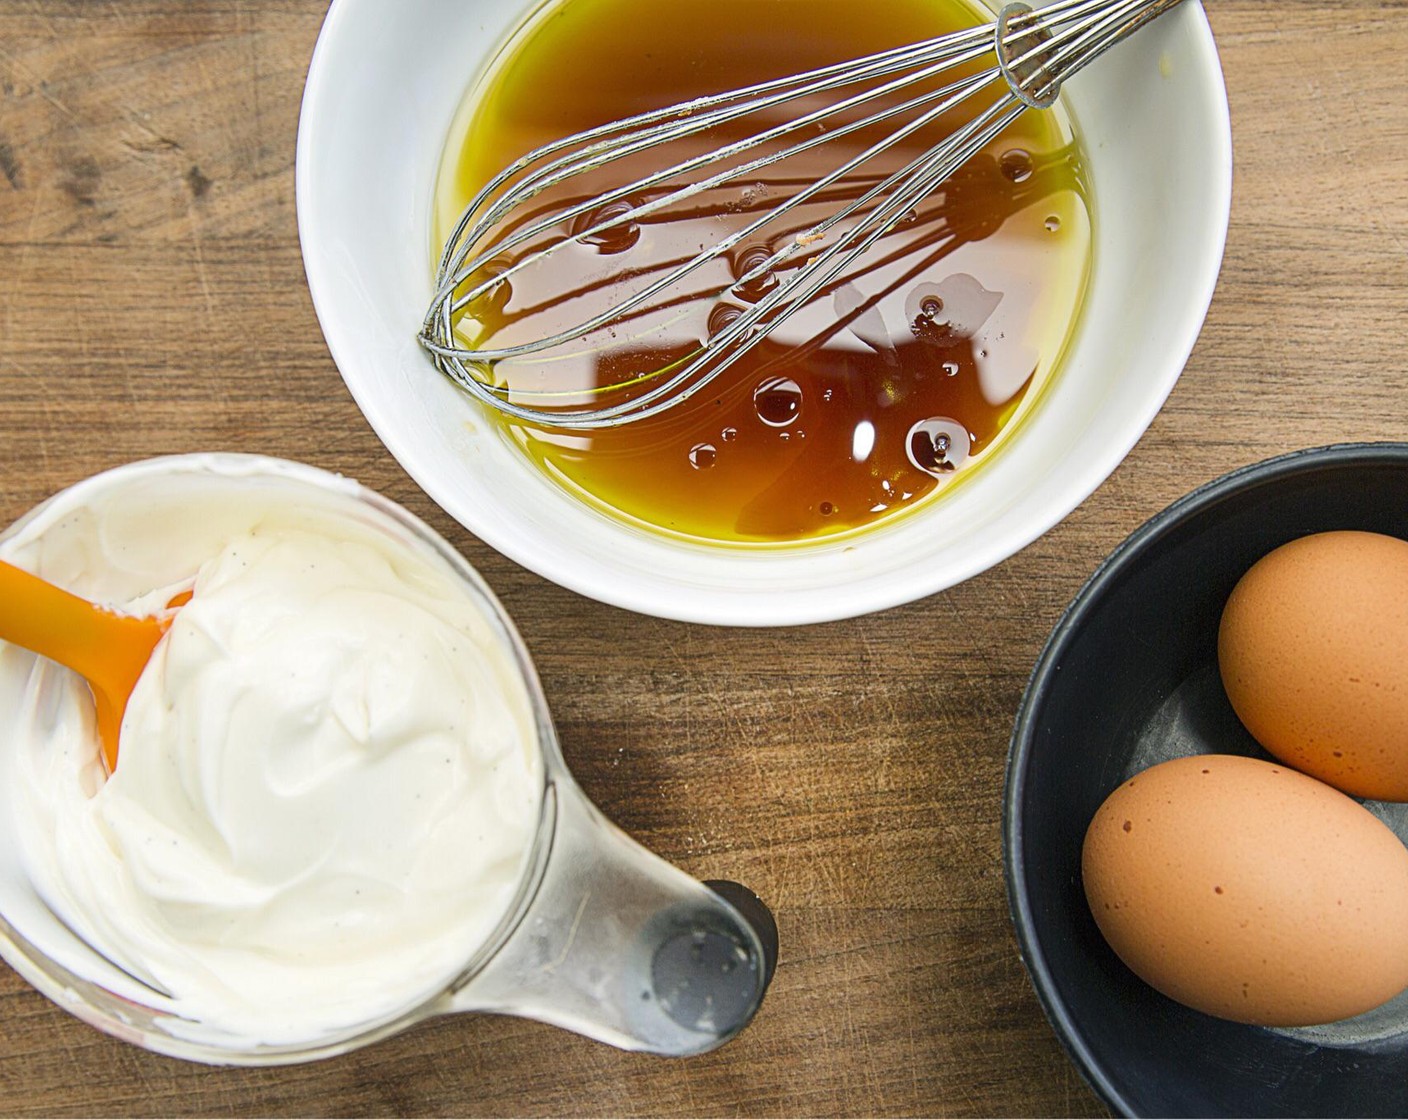 step 7 In another mixing bowl, combine Coconut Oil (1/2 cup) and Maple Syrup (1/2 cup) and beat together with a whisk. Add Eggs (2), Greek Yogurt (1 cup) and Vanilla Extract (1 tsp) and continue to beat together.